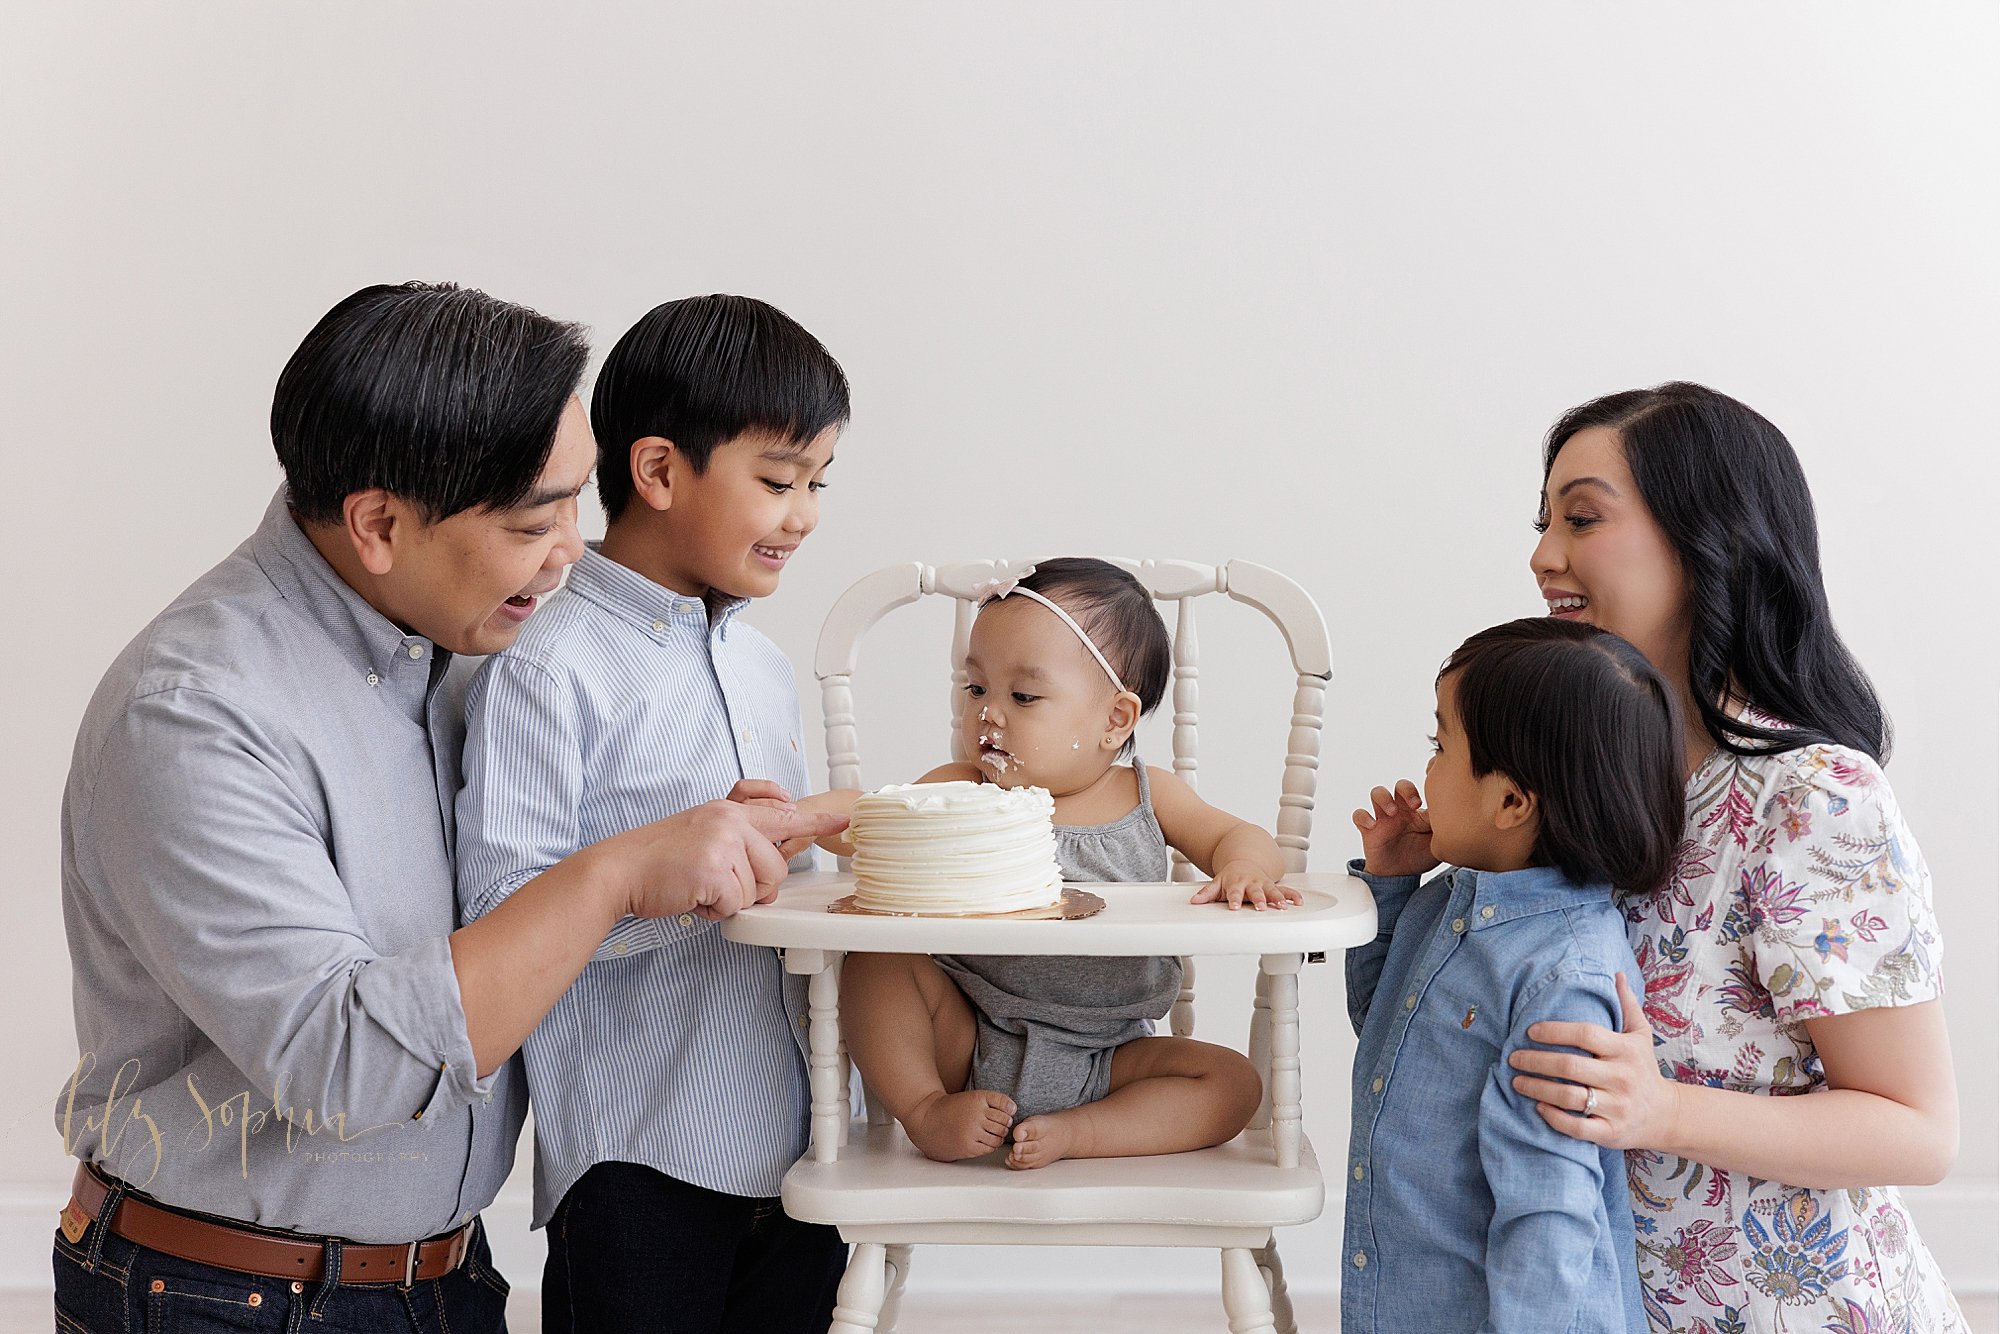  Family first birthday portrait of a one year old Asian girl surrounded by her brothers and parents as she sits in an antique high chair with icing on her face from the smash cake sitting on the tray taken near Roswell in Atlanta in a photography stu